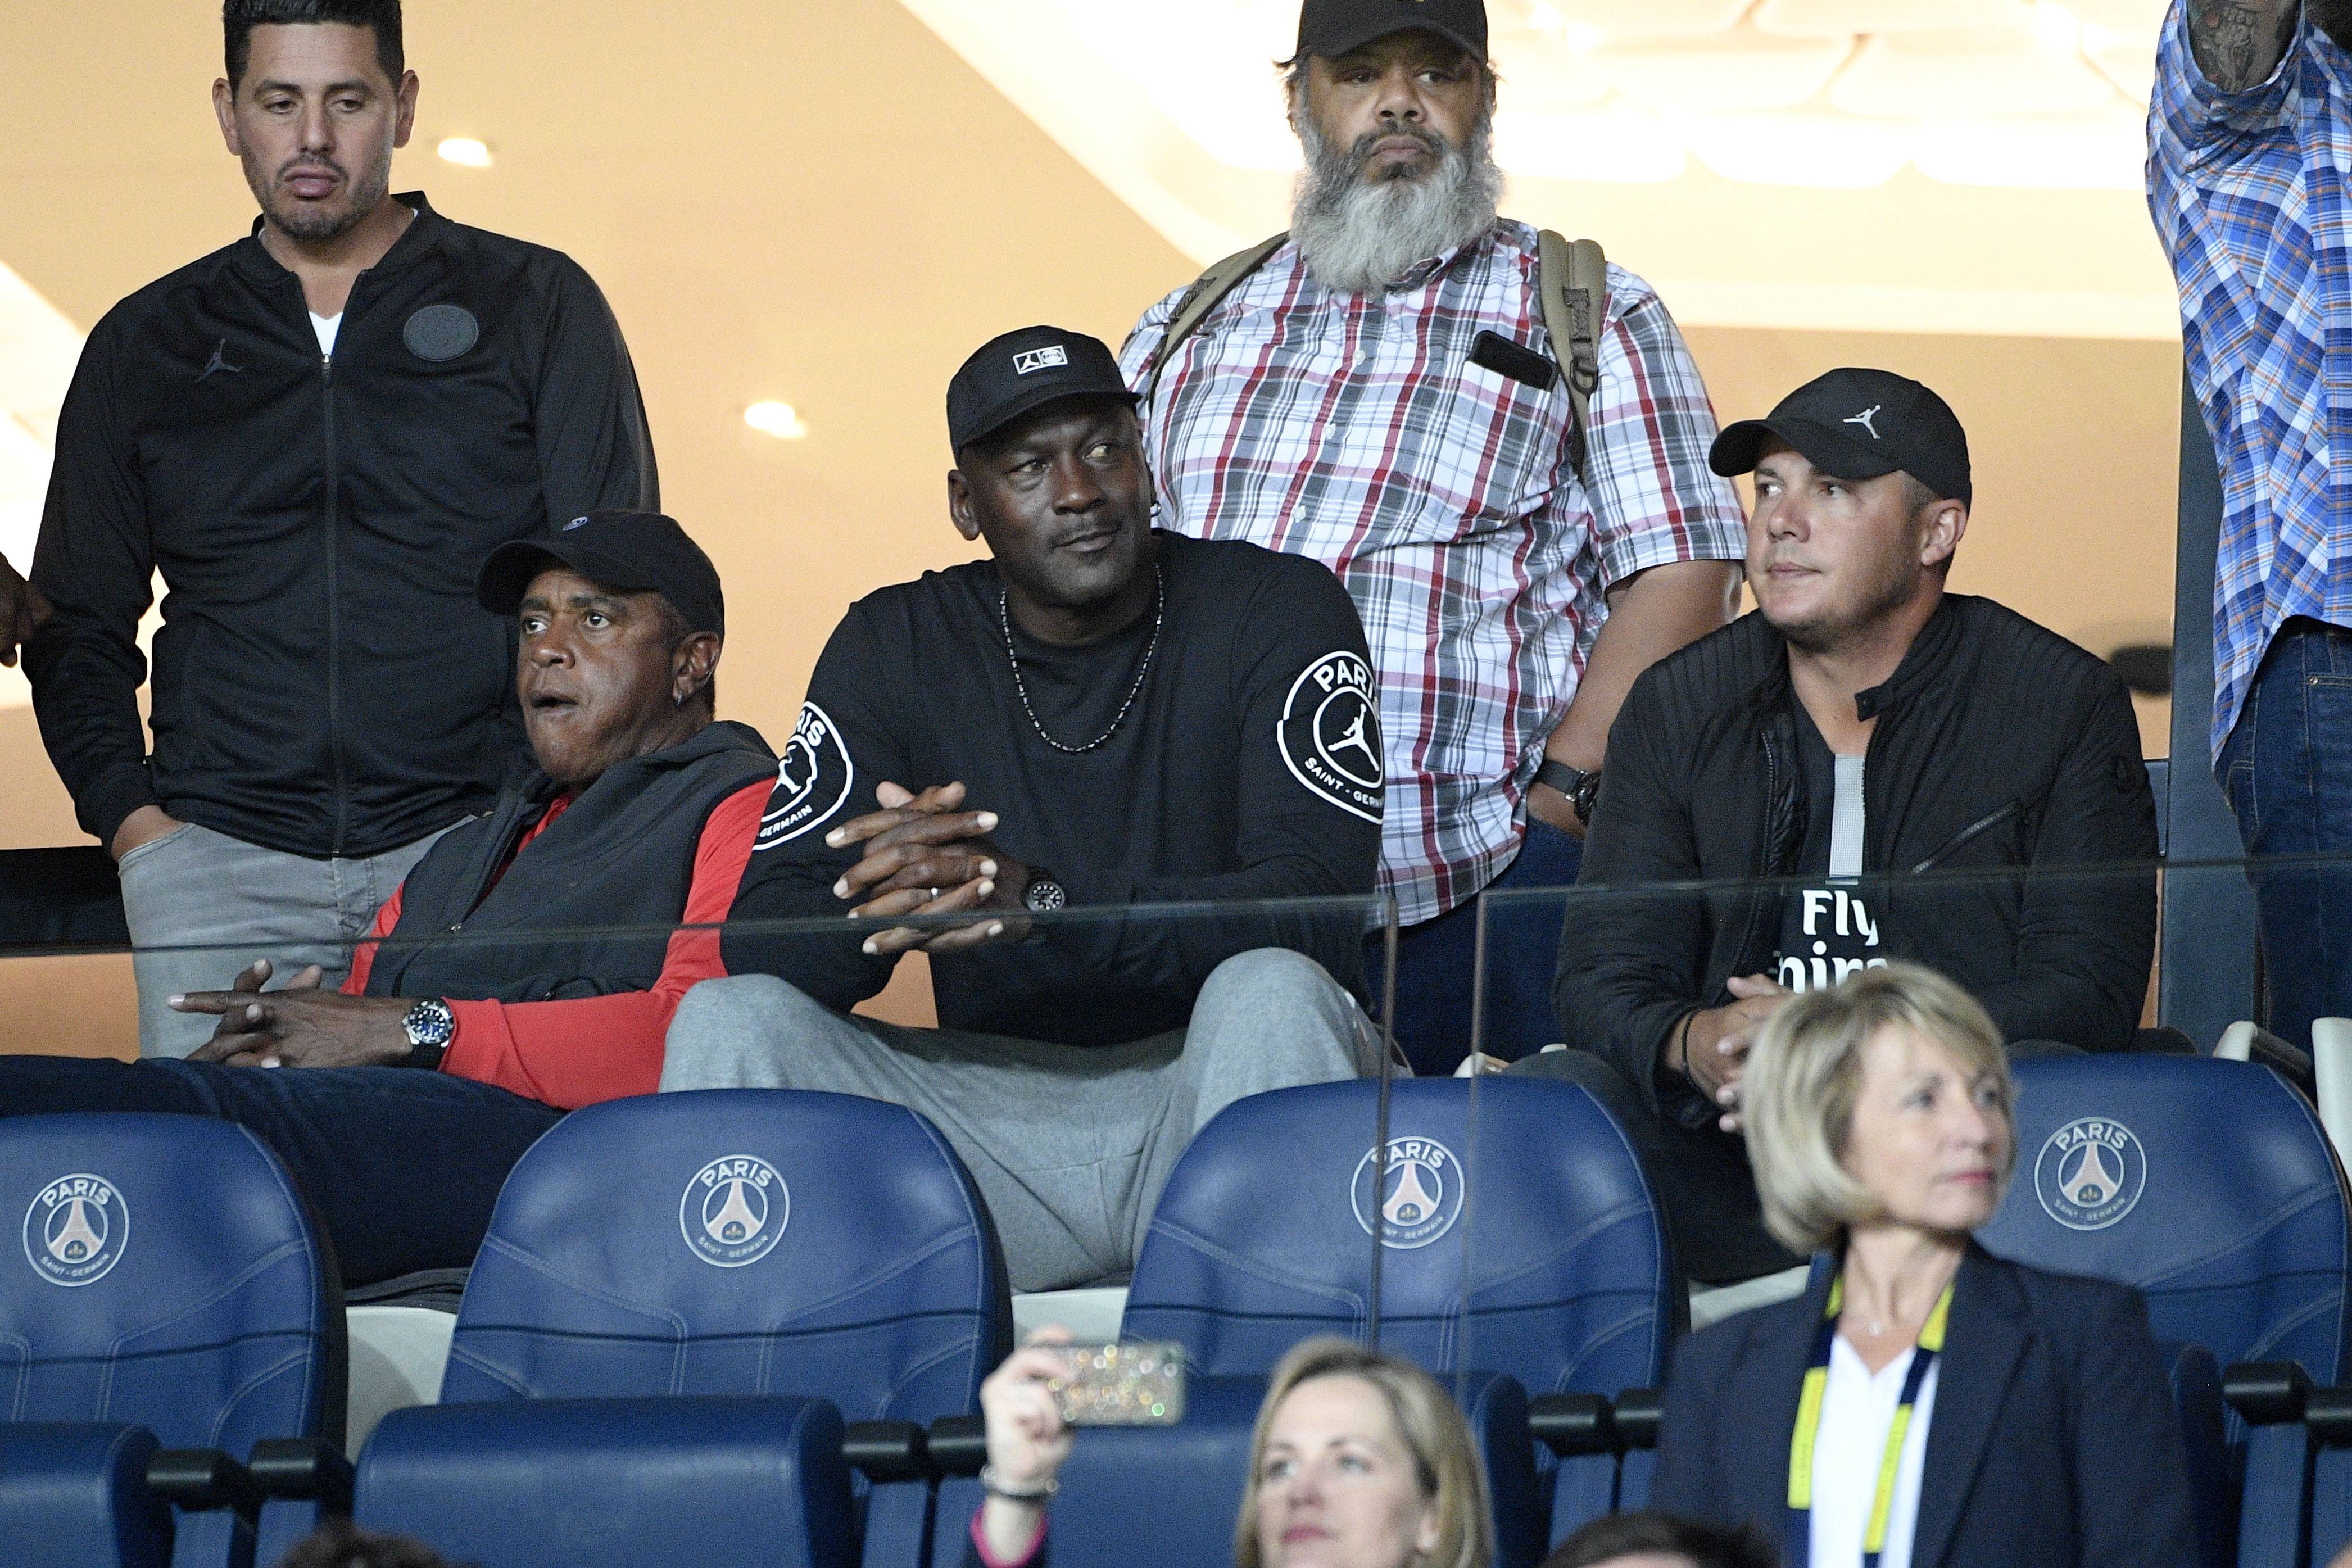 Michael Jordan pays PSG a visit for their game against Reims - Eurohoops